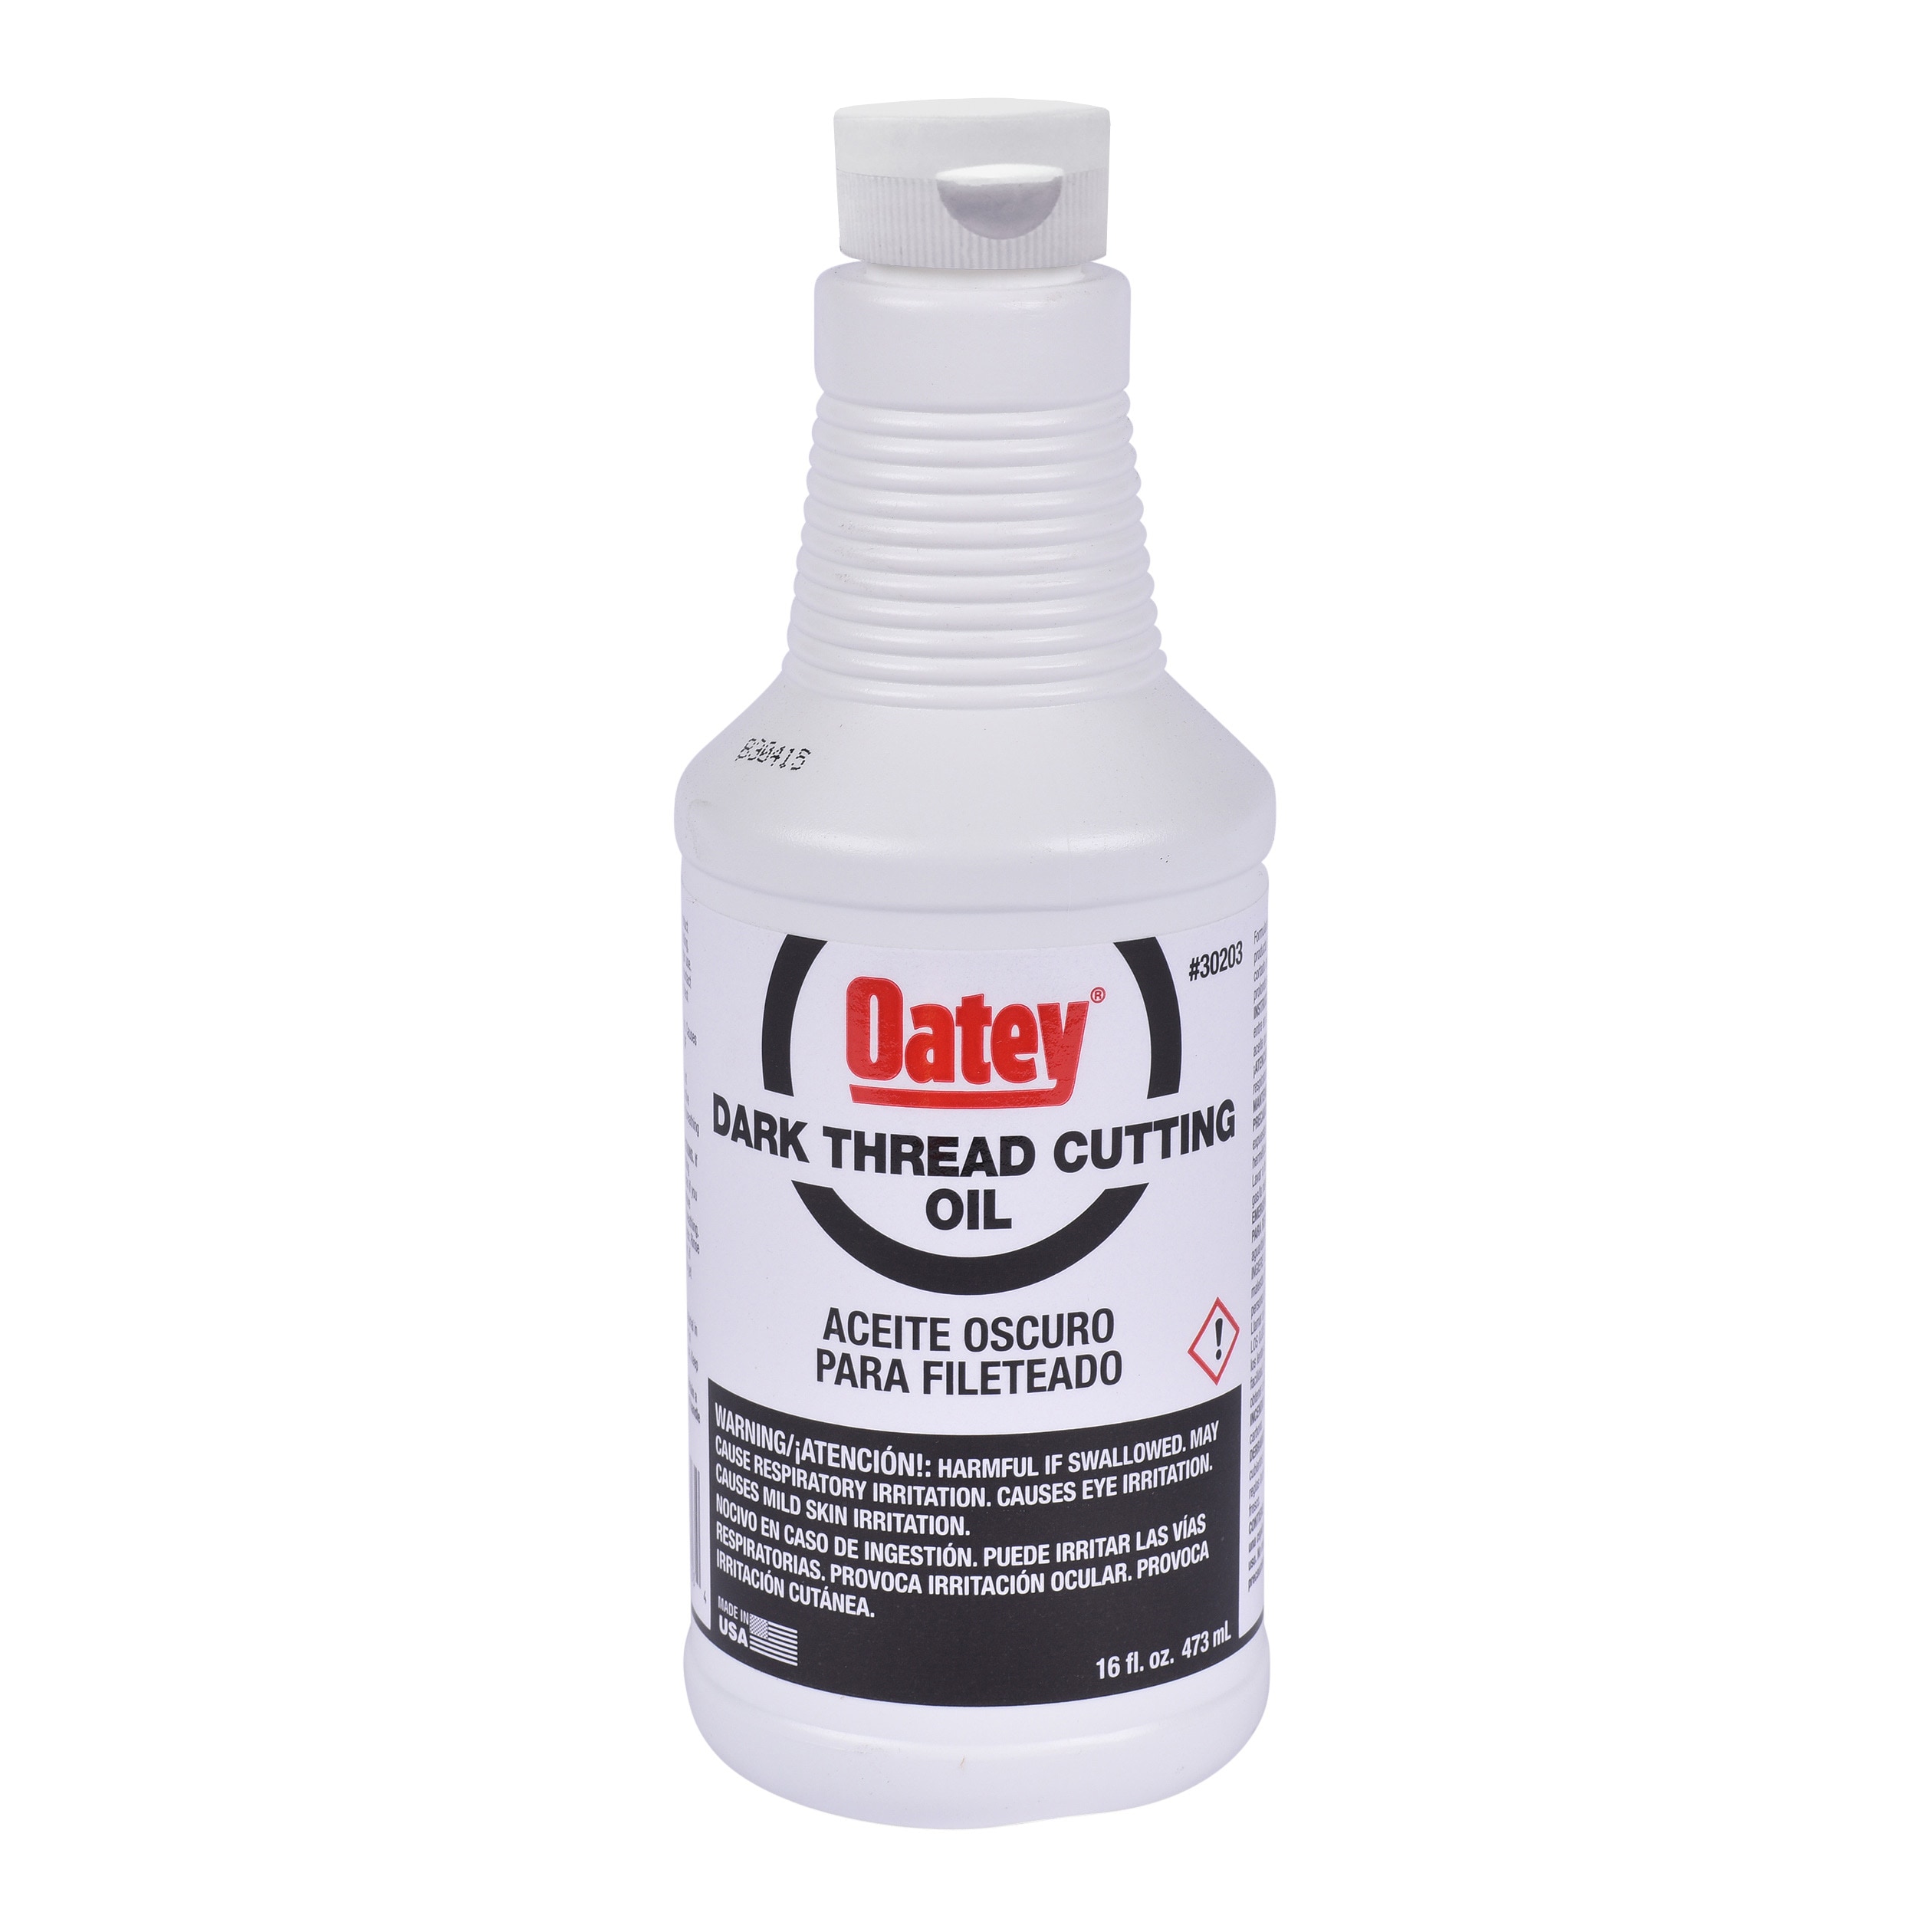  Tap-Paste Machining Lubricant, All-Purpose Cutting Oil Thick  Formula, Perfect for Stainless Steel and Exotic Metals, Cutting Oil for  Drilling Metal